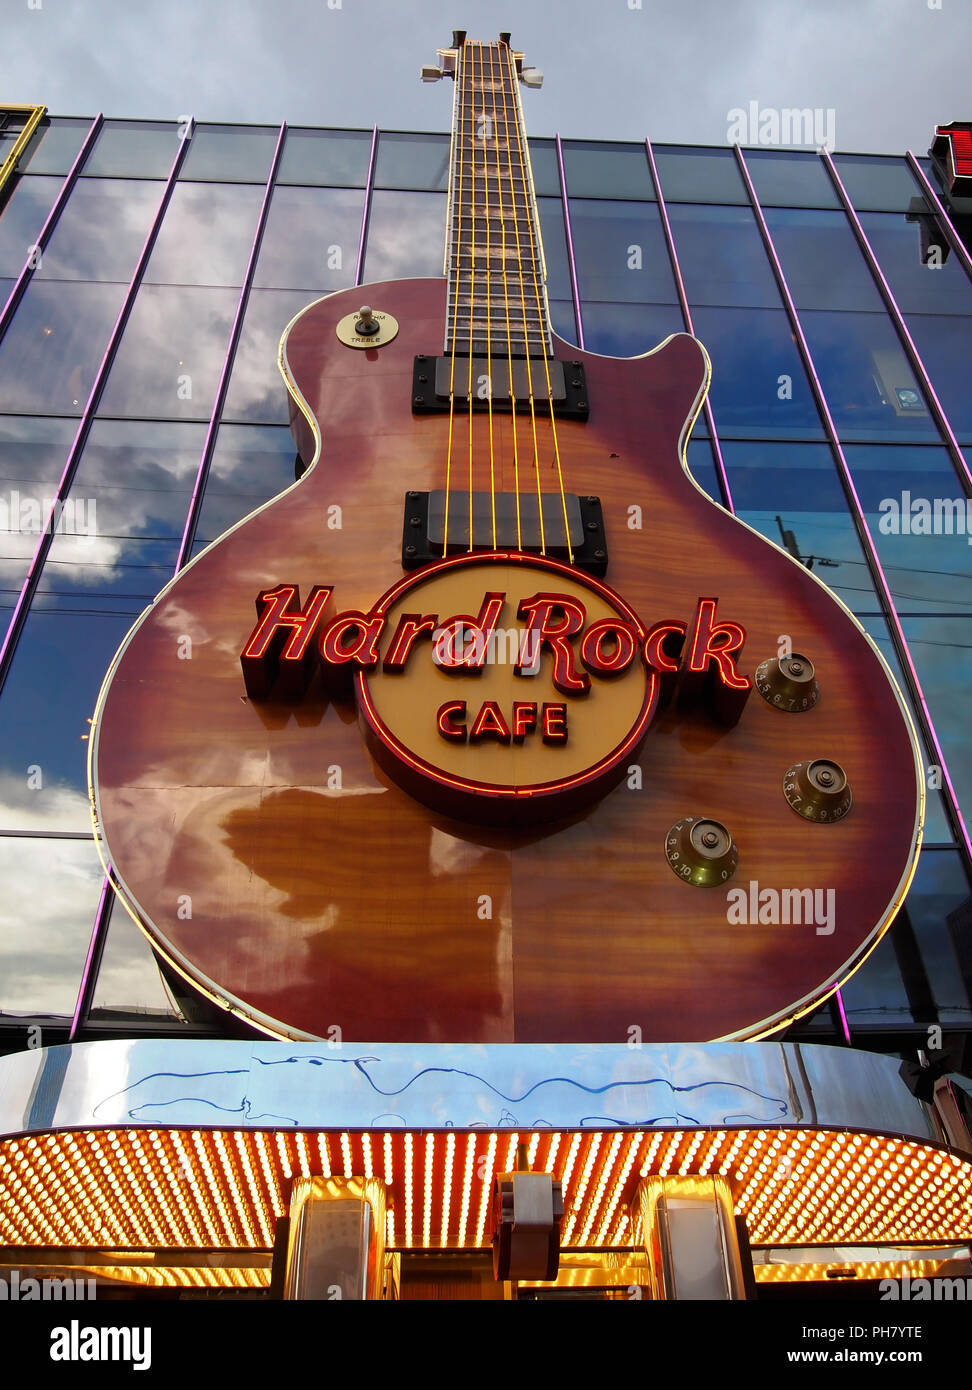 LAS VEGAS, NEVADA - JULY 21, 2018: The giant, larger than life guitar attached to the front of the building serves as the sign for the Hard Rock Cafe. Stock Photo